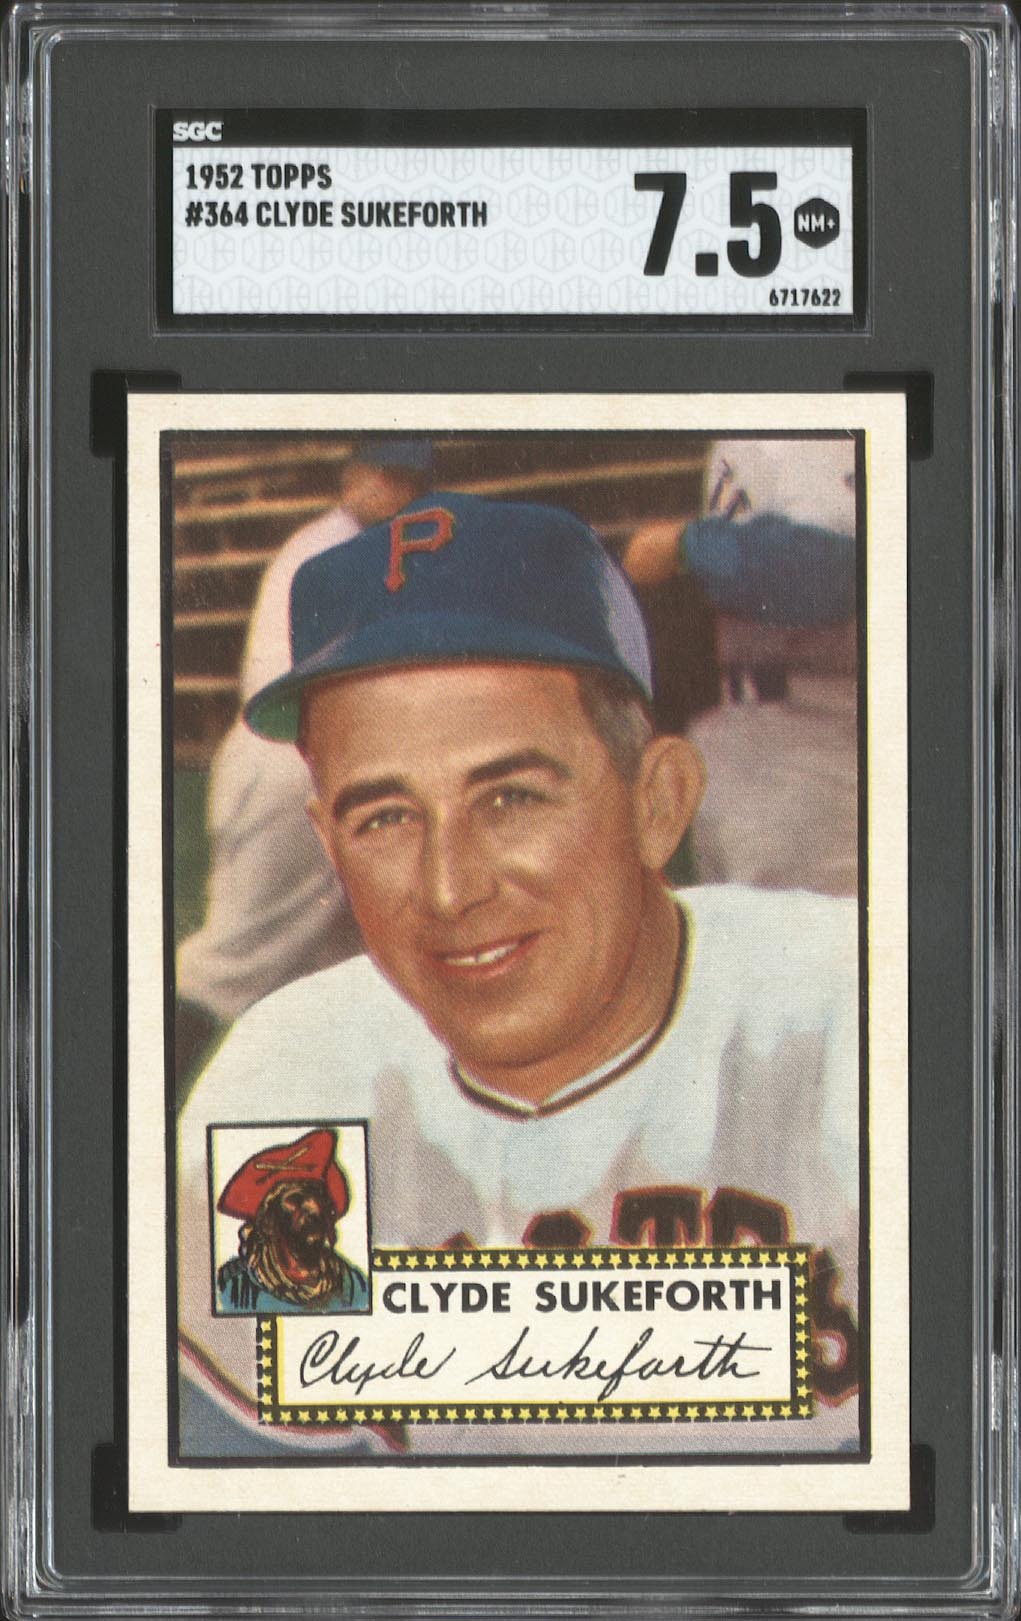  1952 Topps #364 Clyde Sukeforth - SGC NM+ 7.5